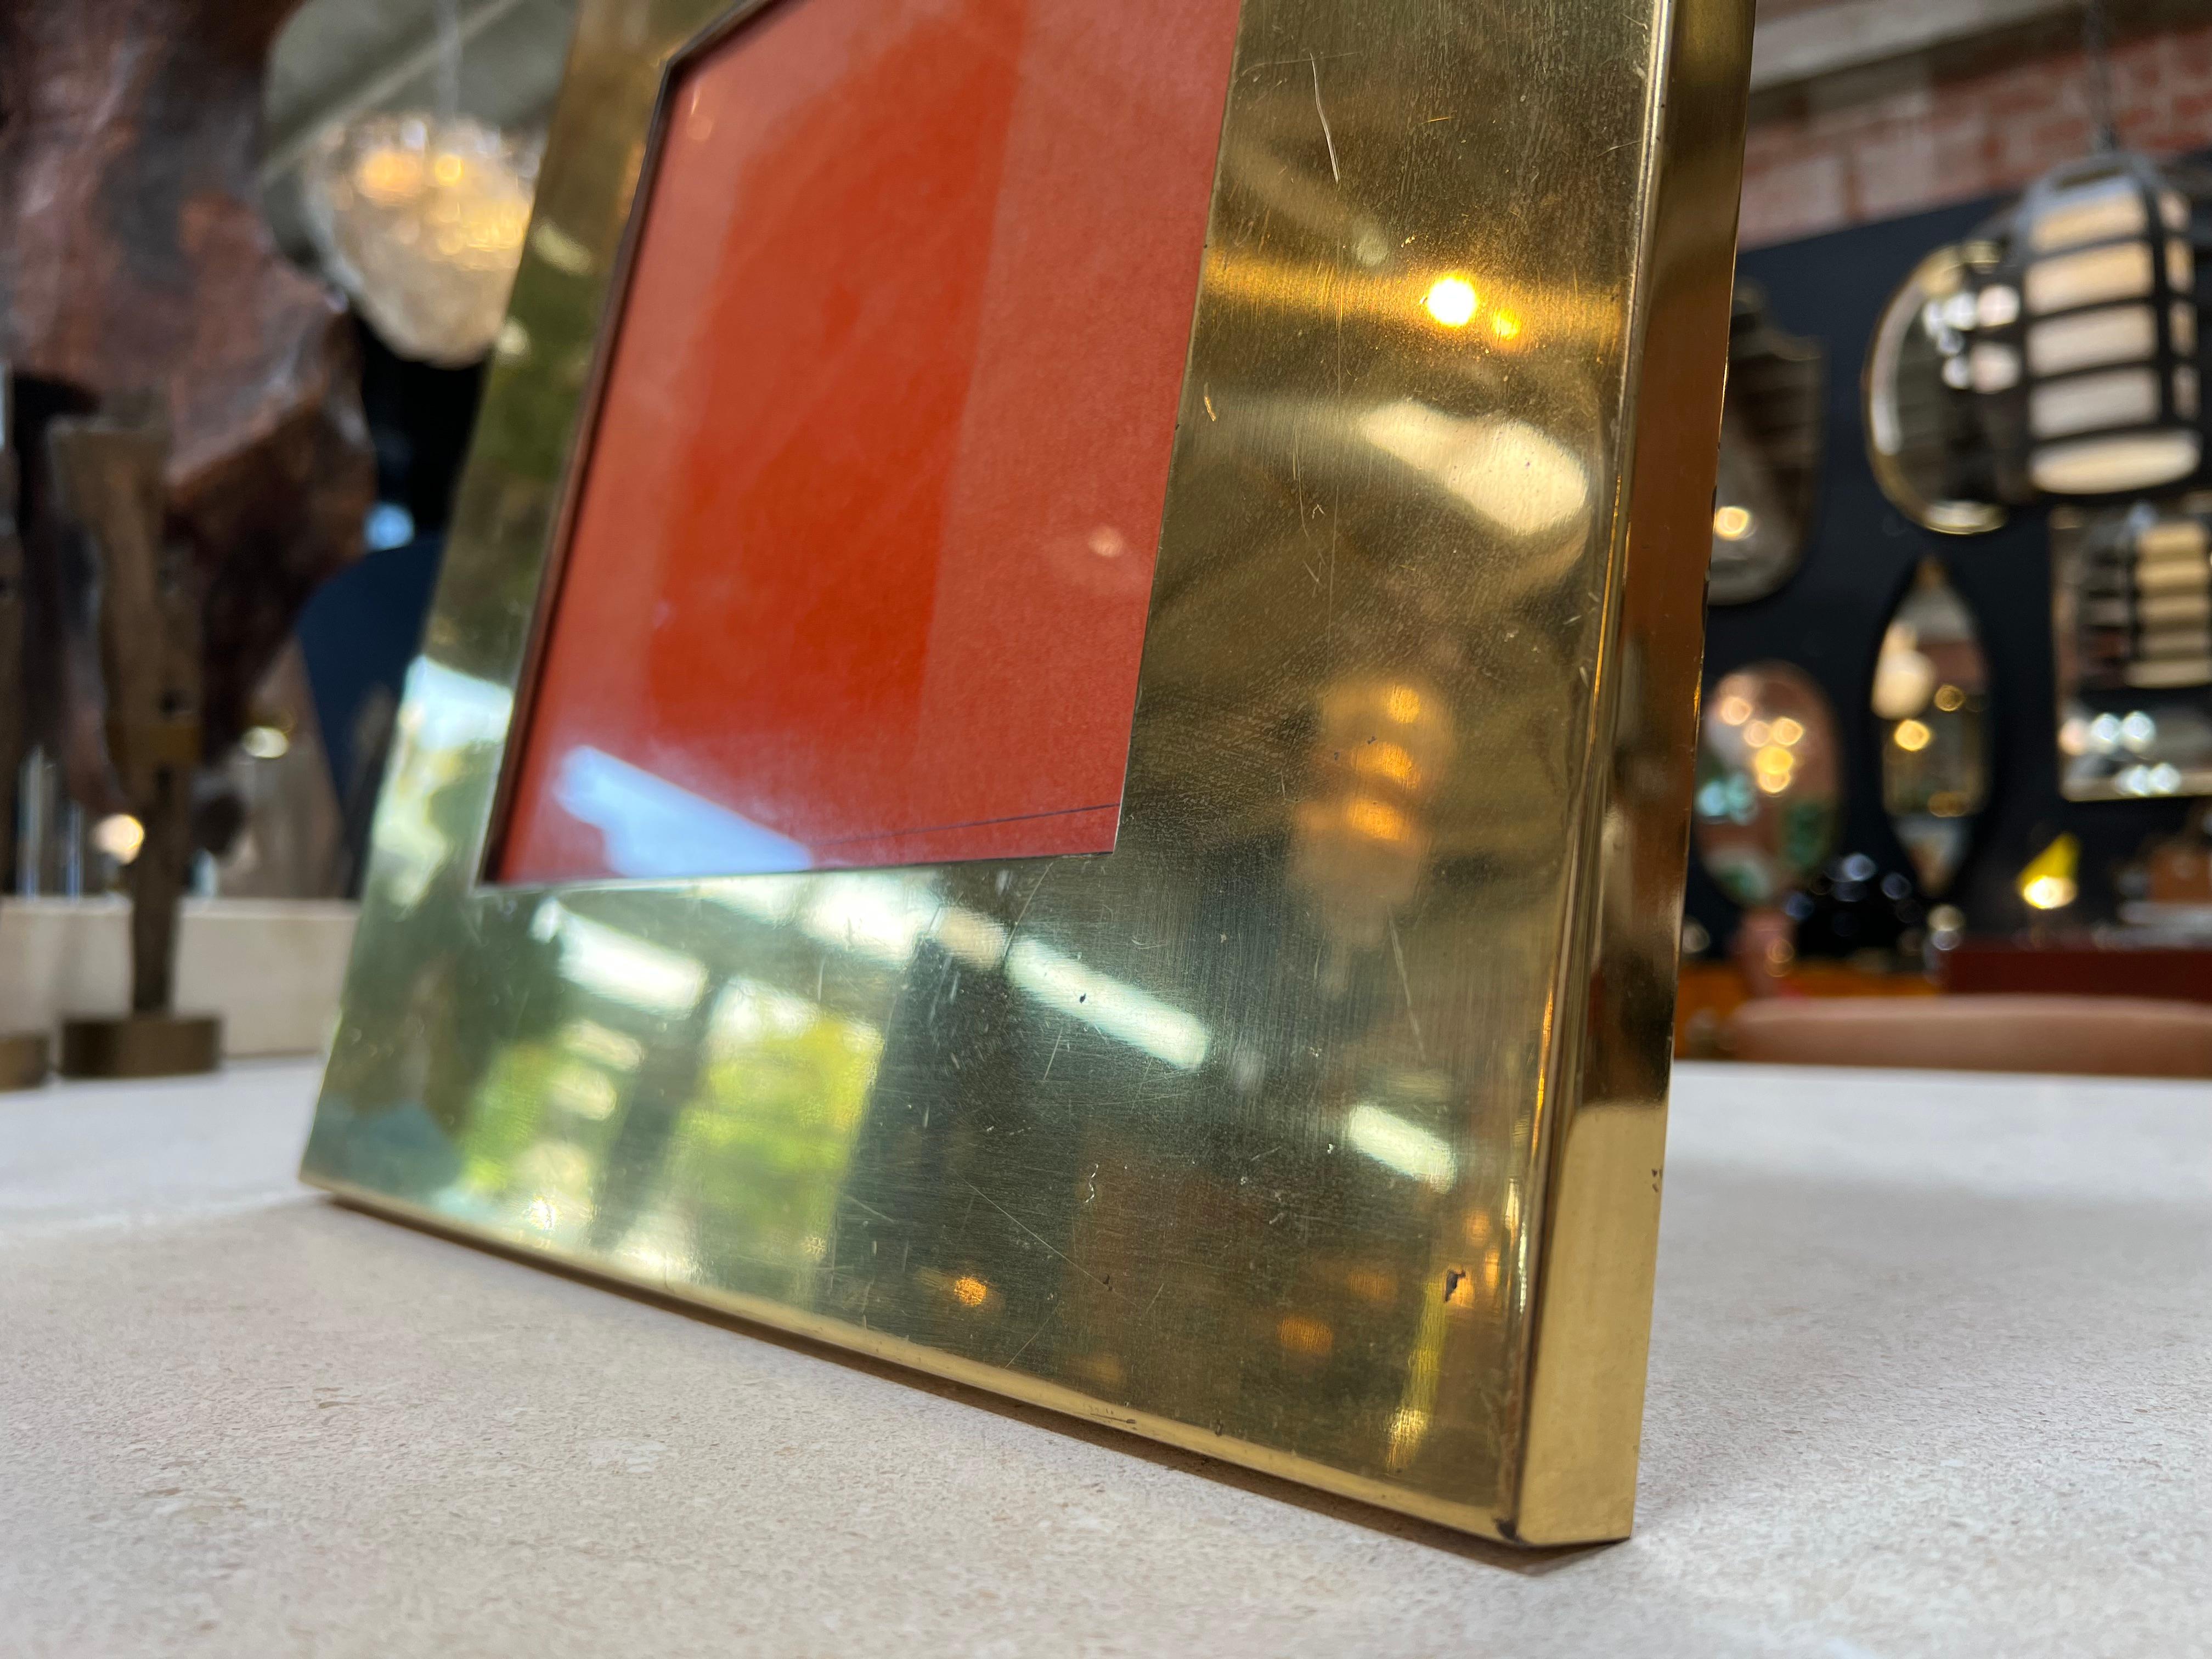 Fully brass Italian square picture frame made in Italy 1980s

